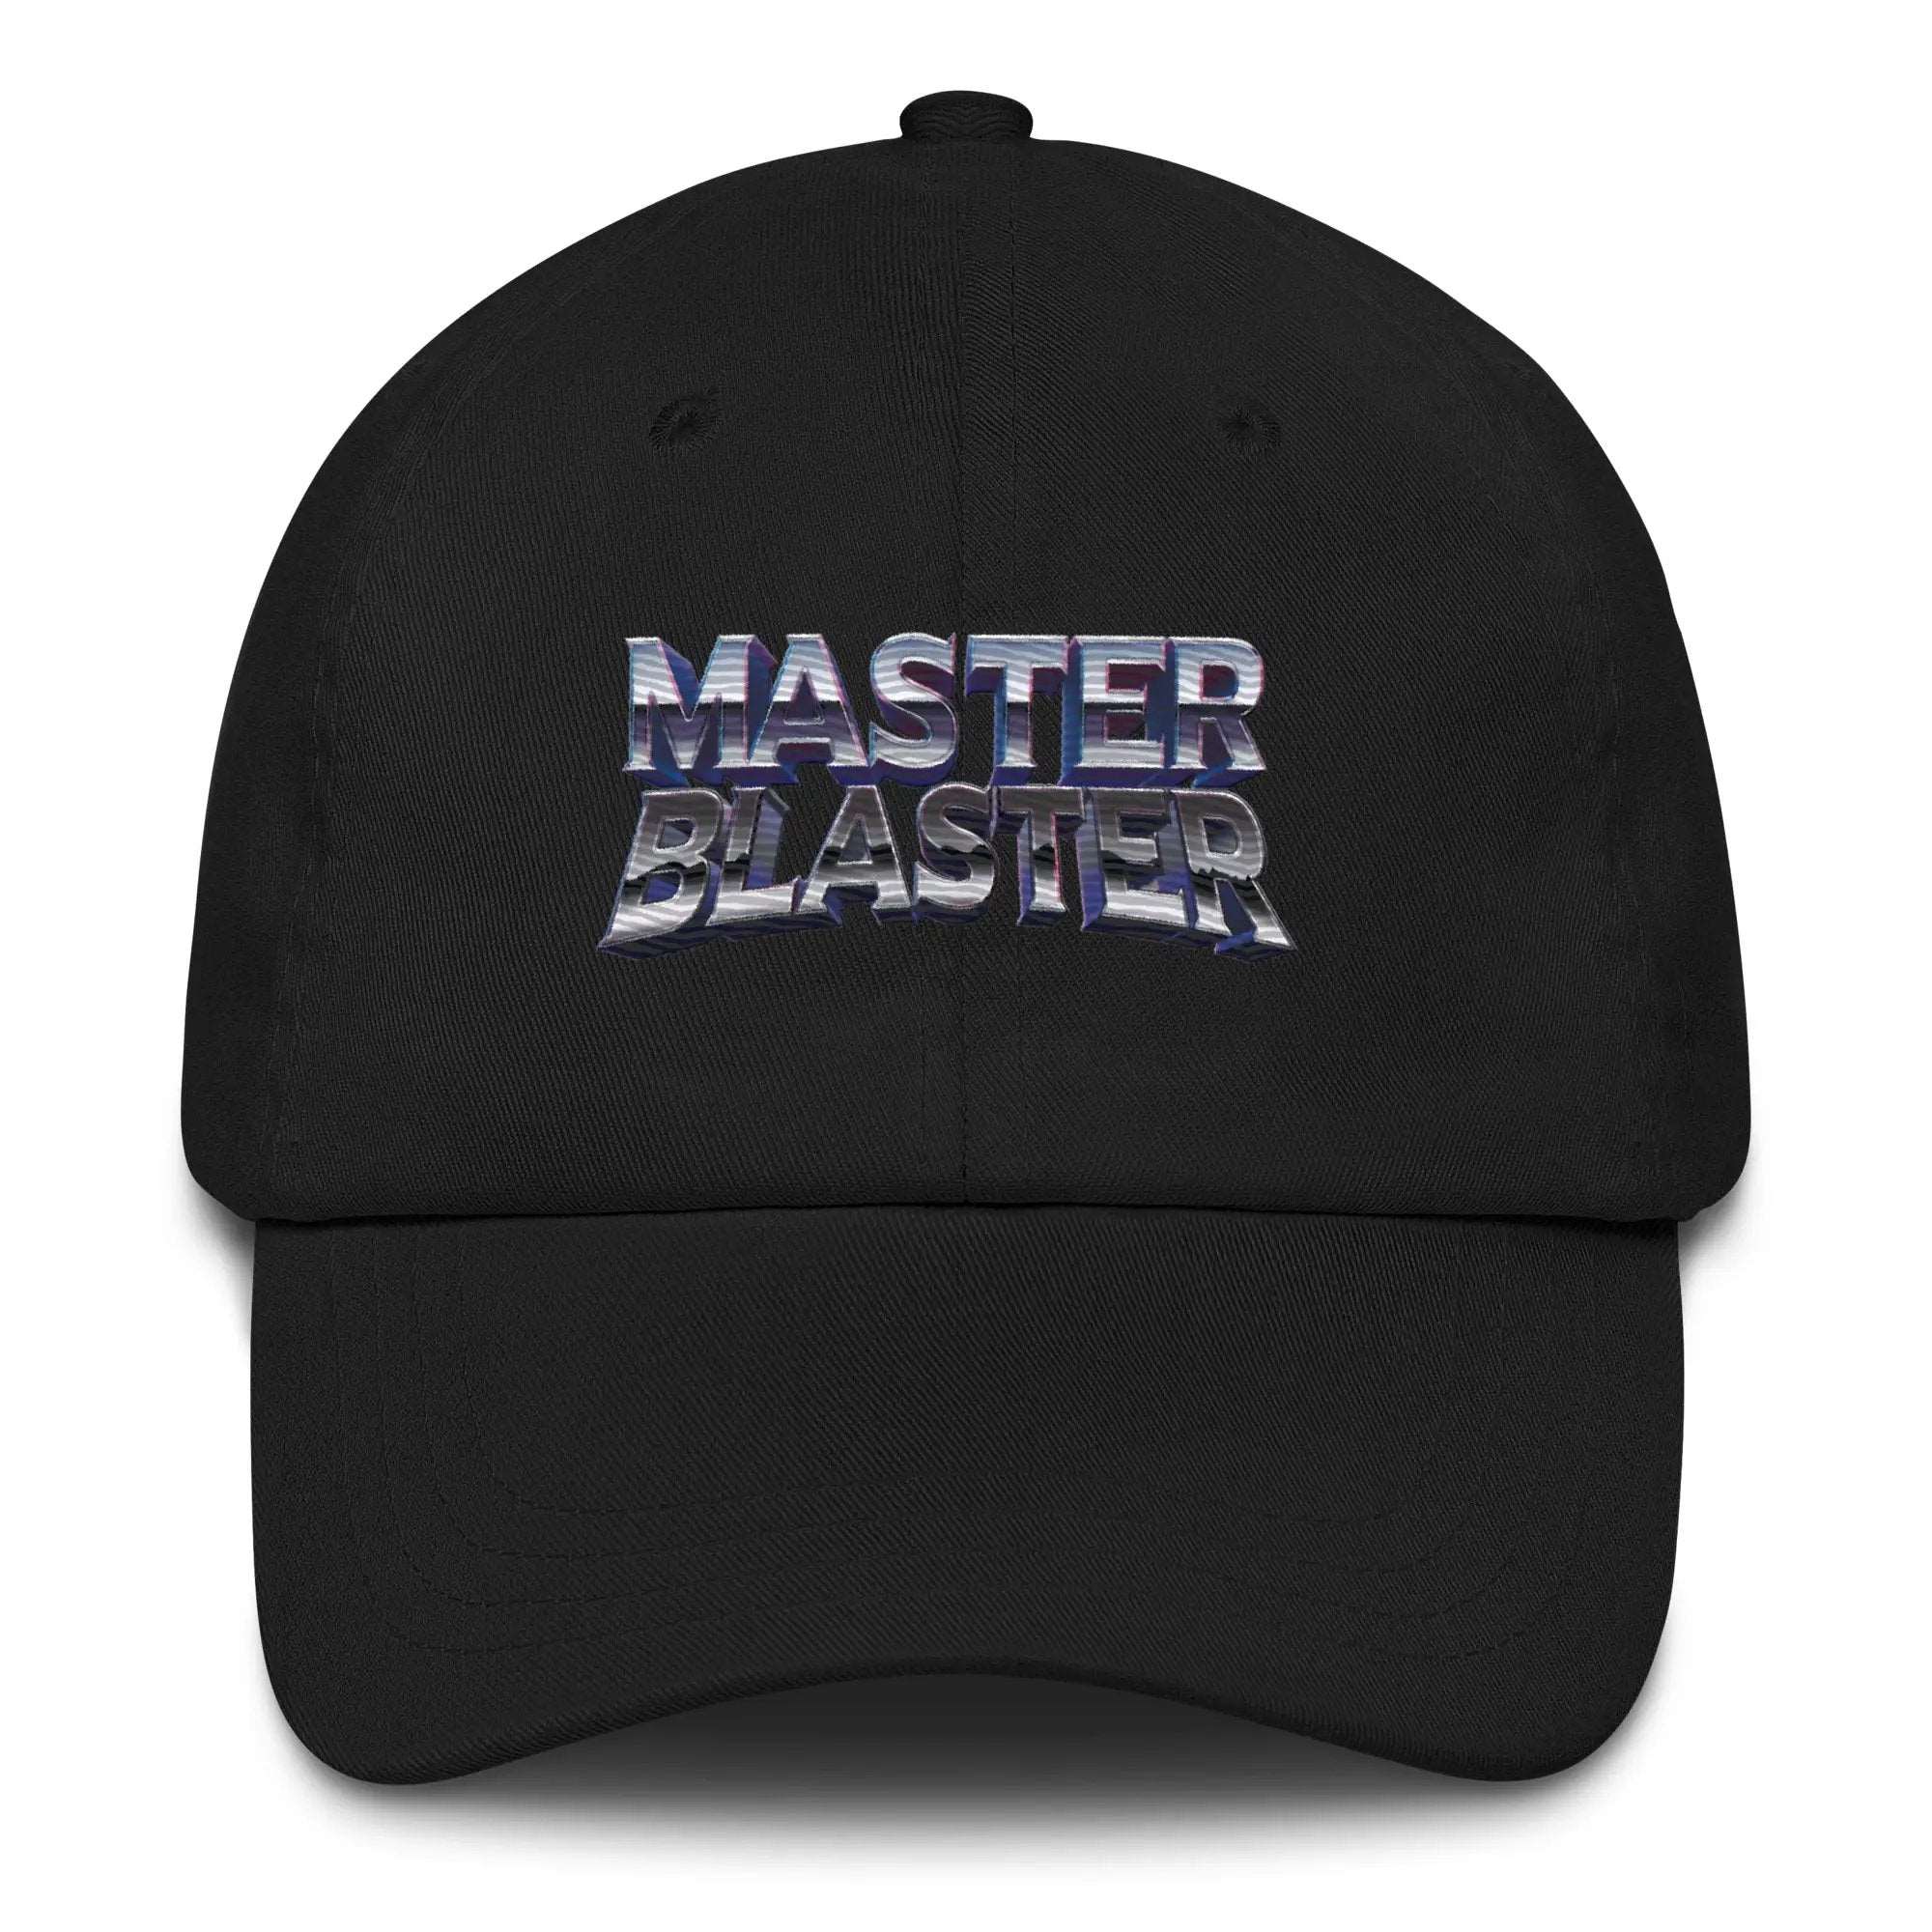 a black hat with the word master blaster printed on it